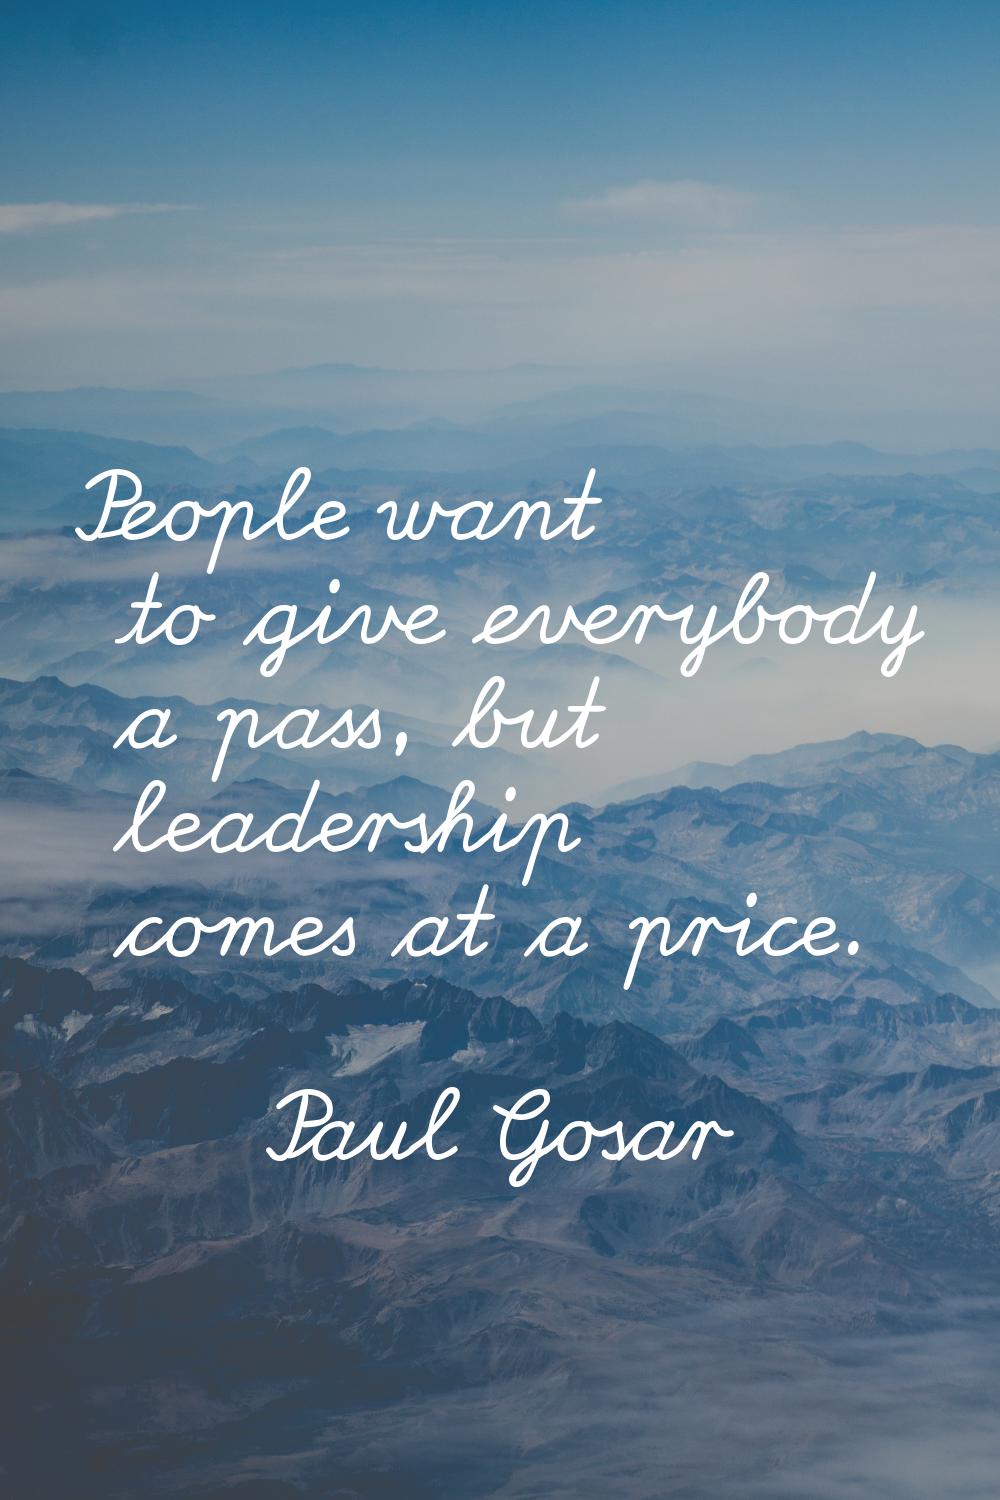 People want to give everybody a pass, but leadership comes at a price.